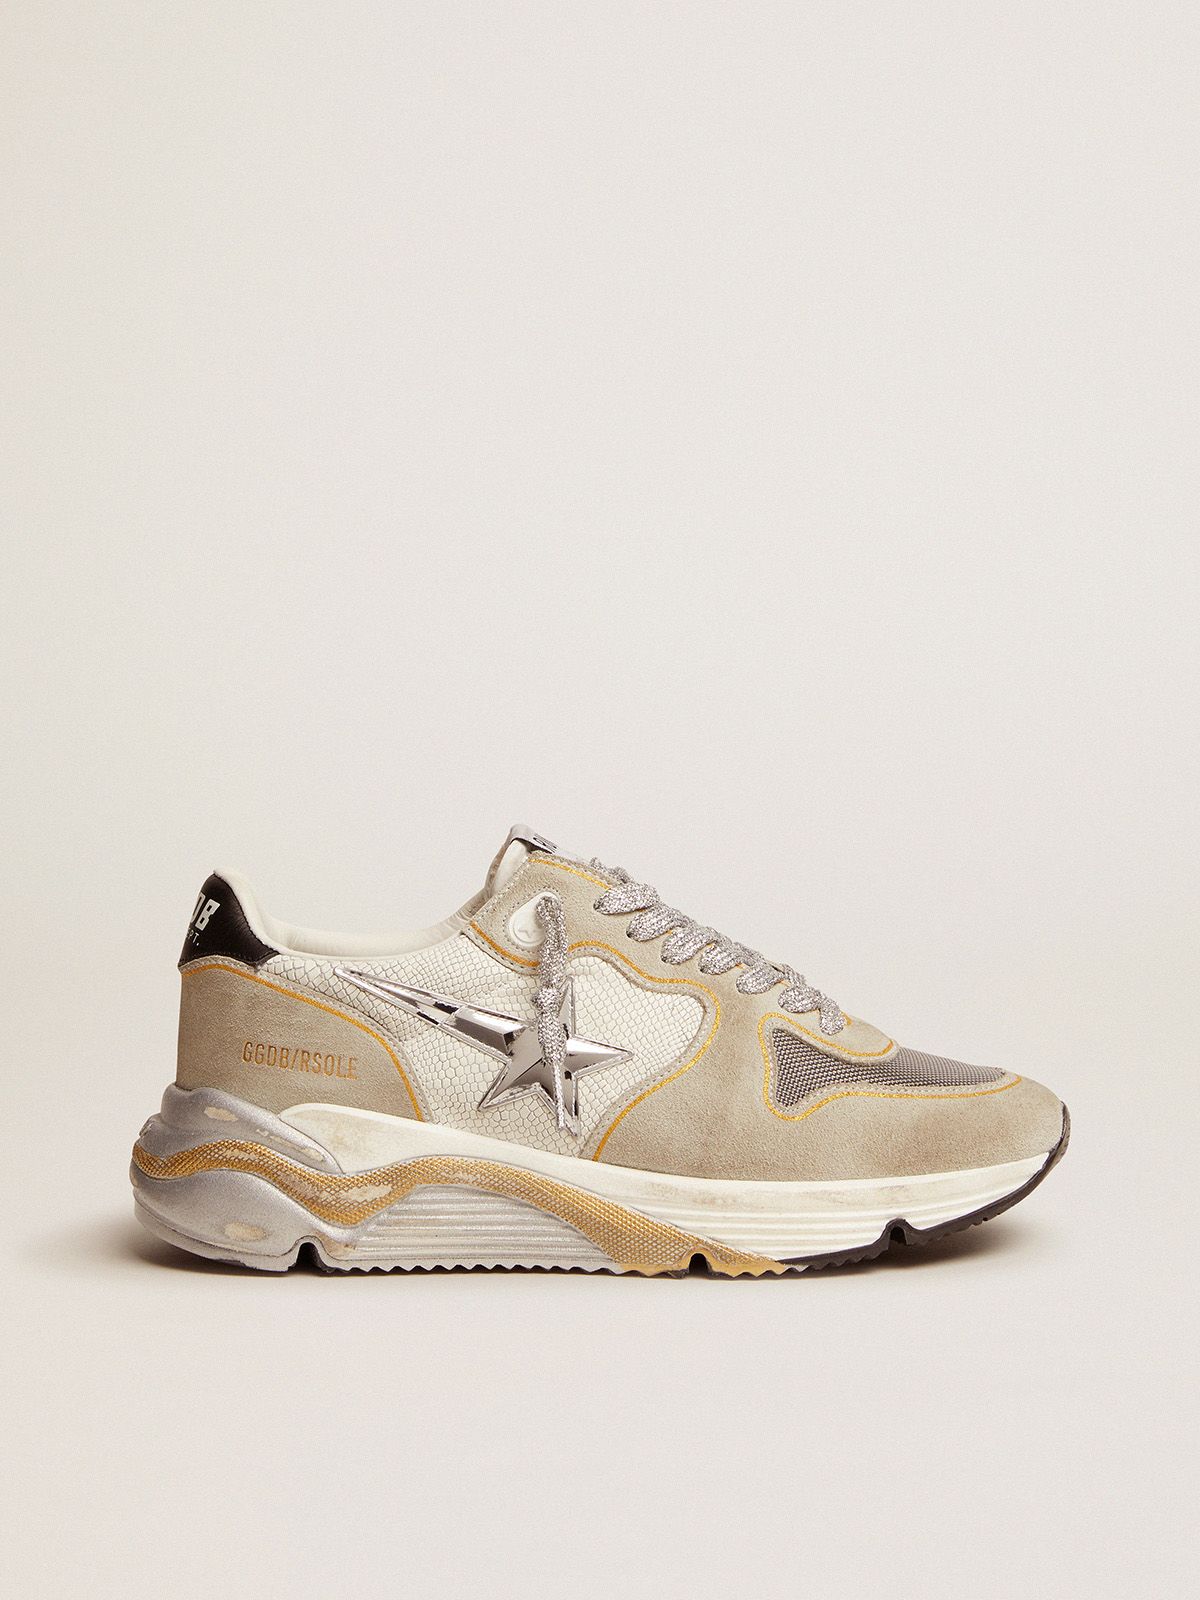 Golden Goose Ball Star Uomo Running Sole LTD sneakers in white snake-print leather and suede with mesh insert